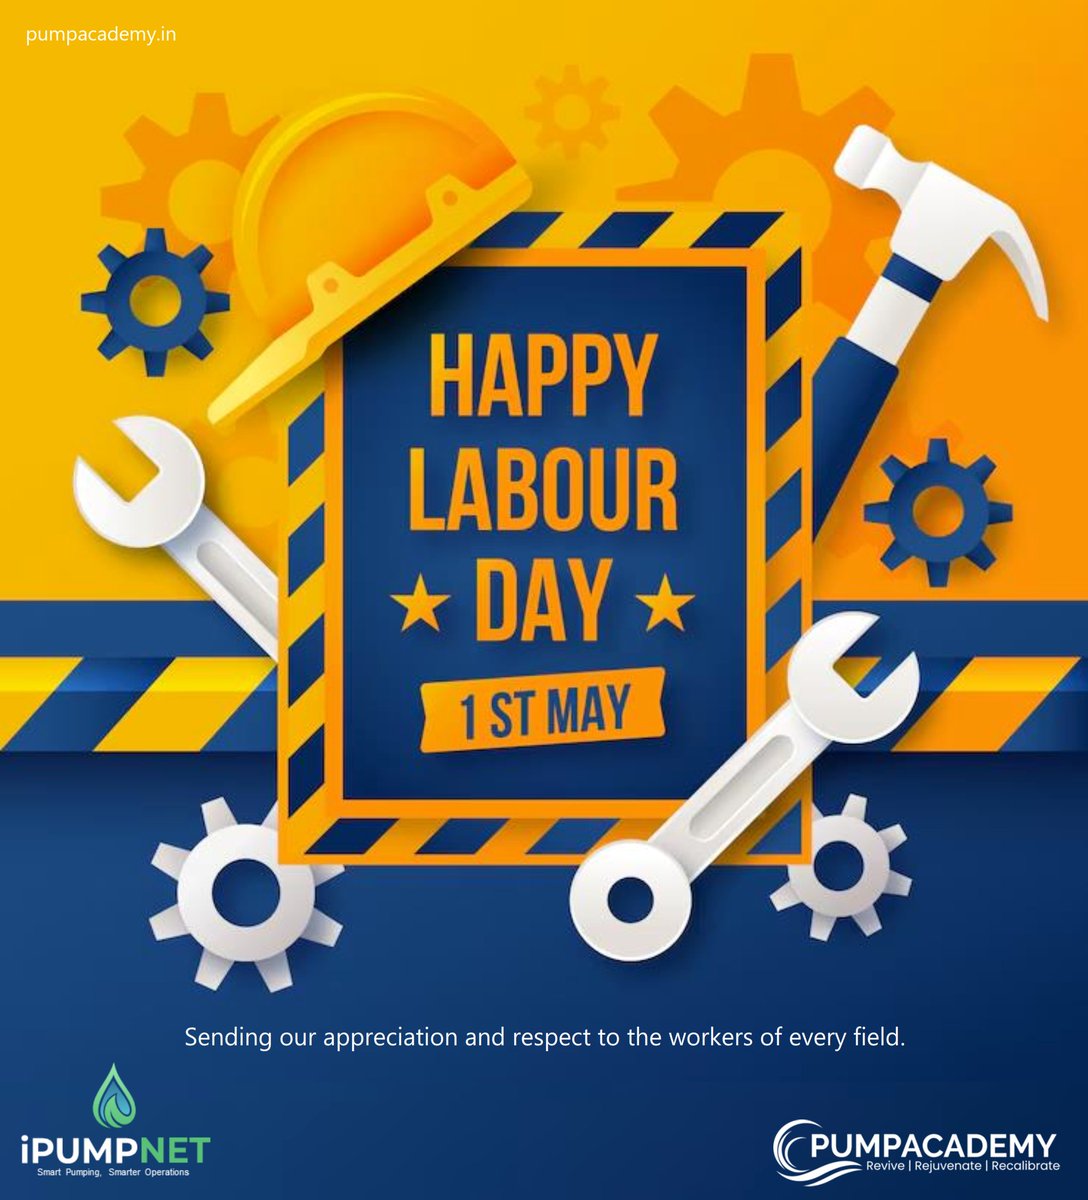 Pump Academy Private Limited wishes you Happy Labour Day! #LabourDay #LabourDay2024 #pumpacademy #ipumpnet